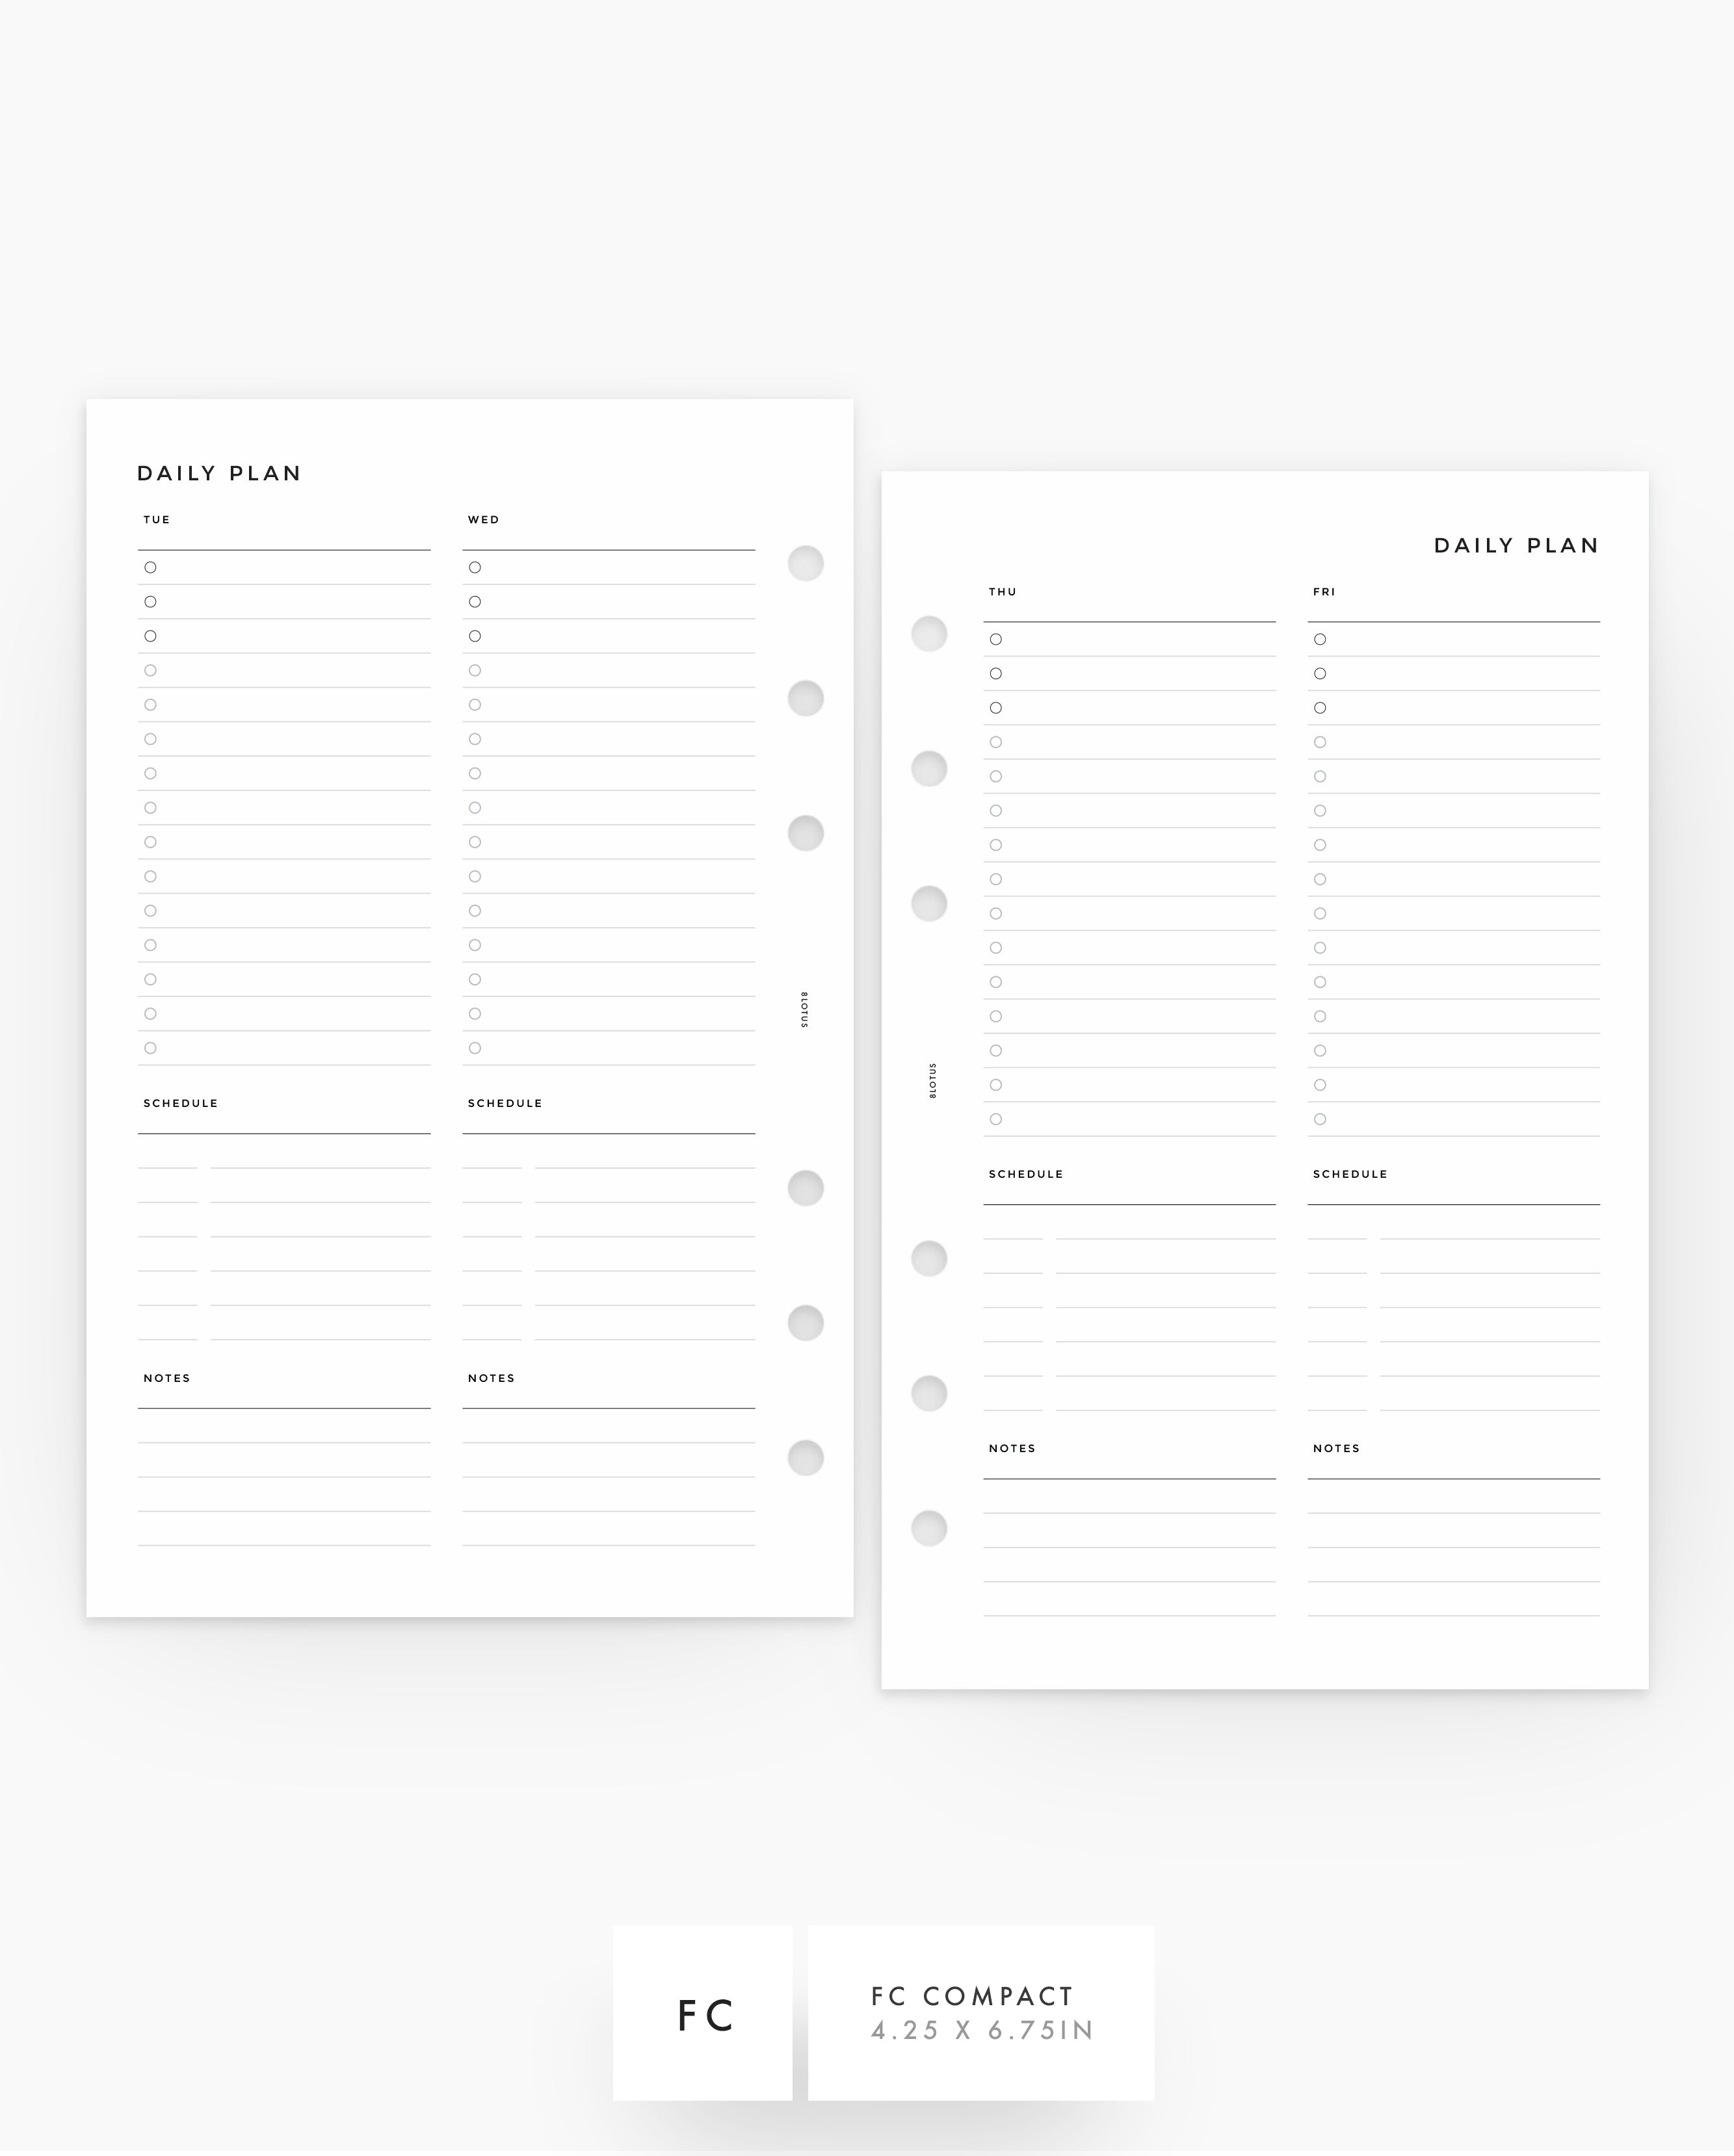 MN080A - COMPACT DAILY PLANNER - TO DO, SCHEDULE, NOTES - 2D01P / WO4P - PDF